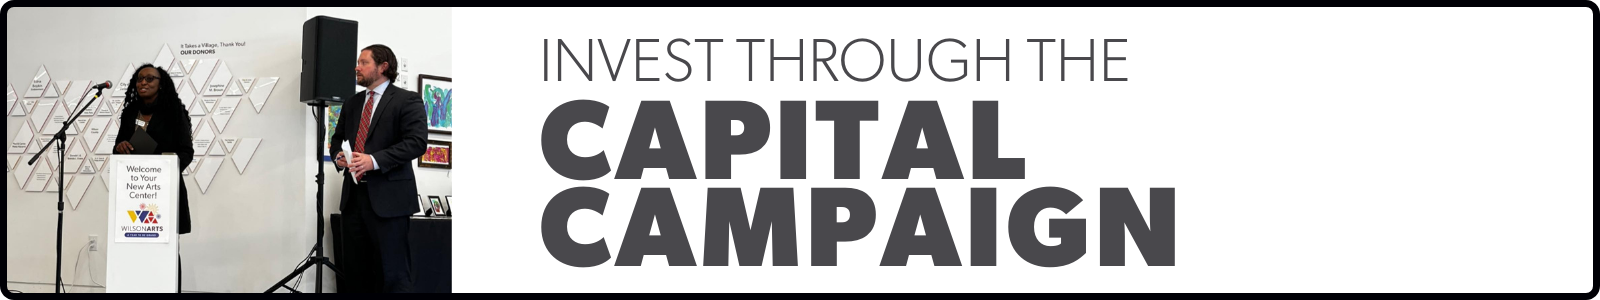 Invest Through the Capital Campaign